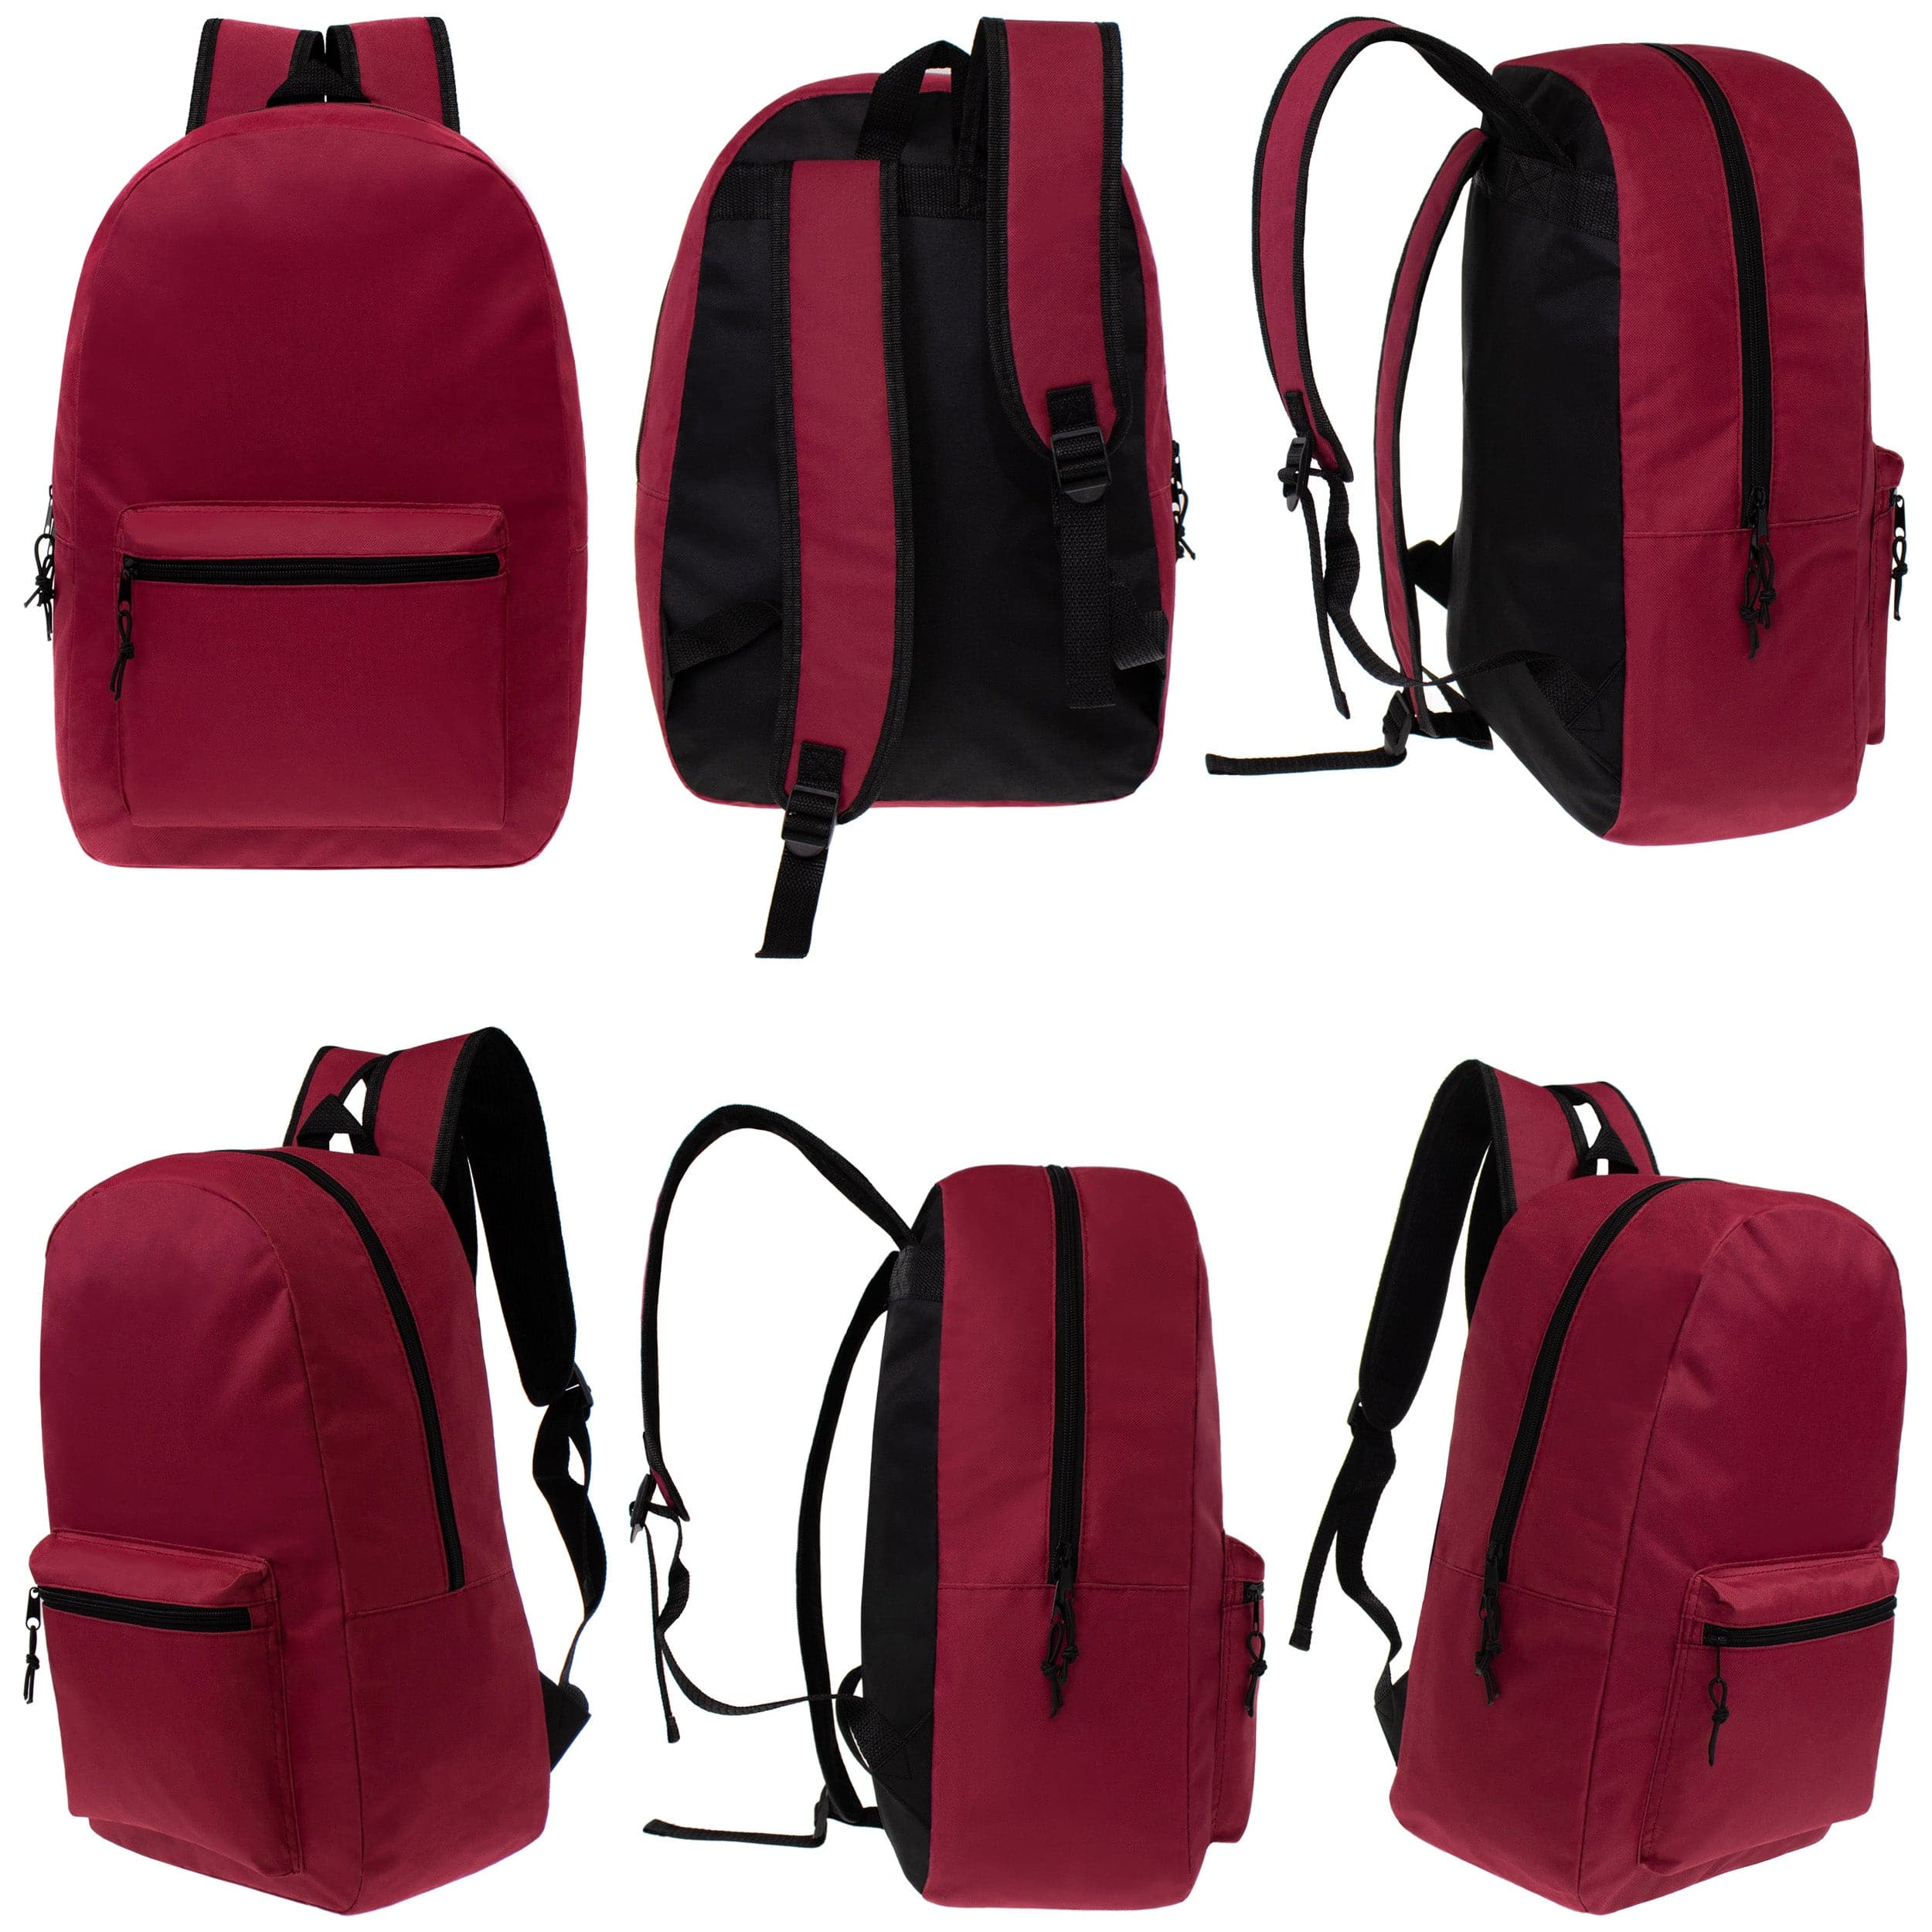 15 Inch Wholesale Backpacks For Kids